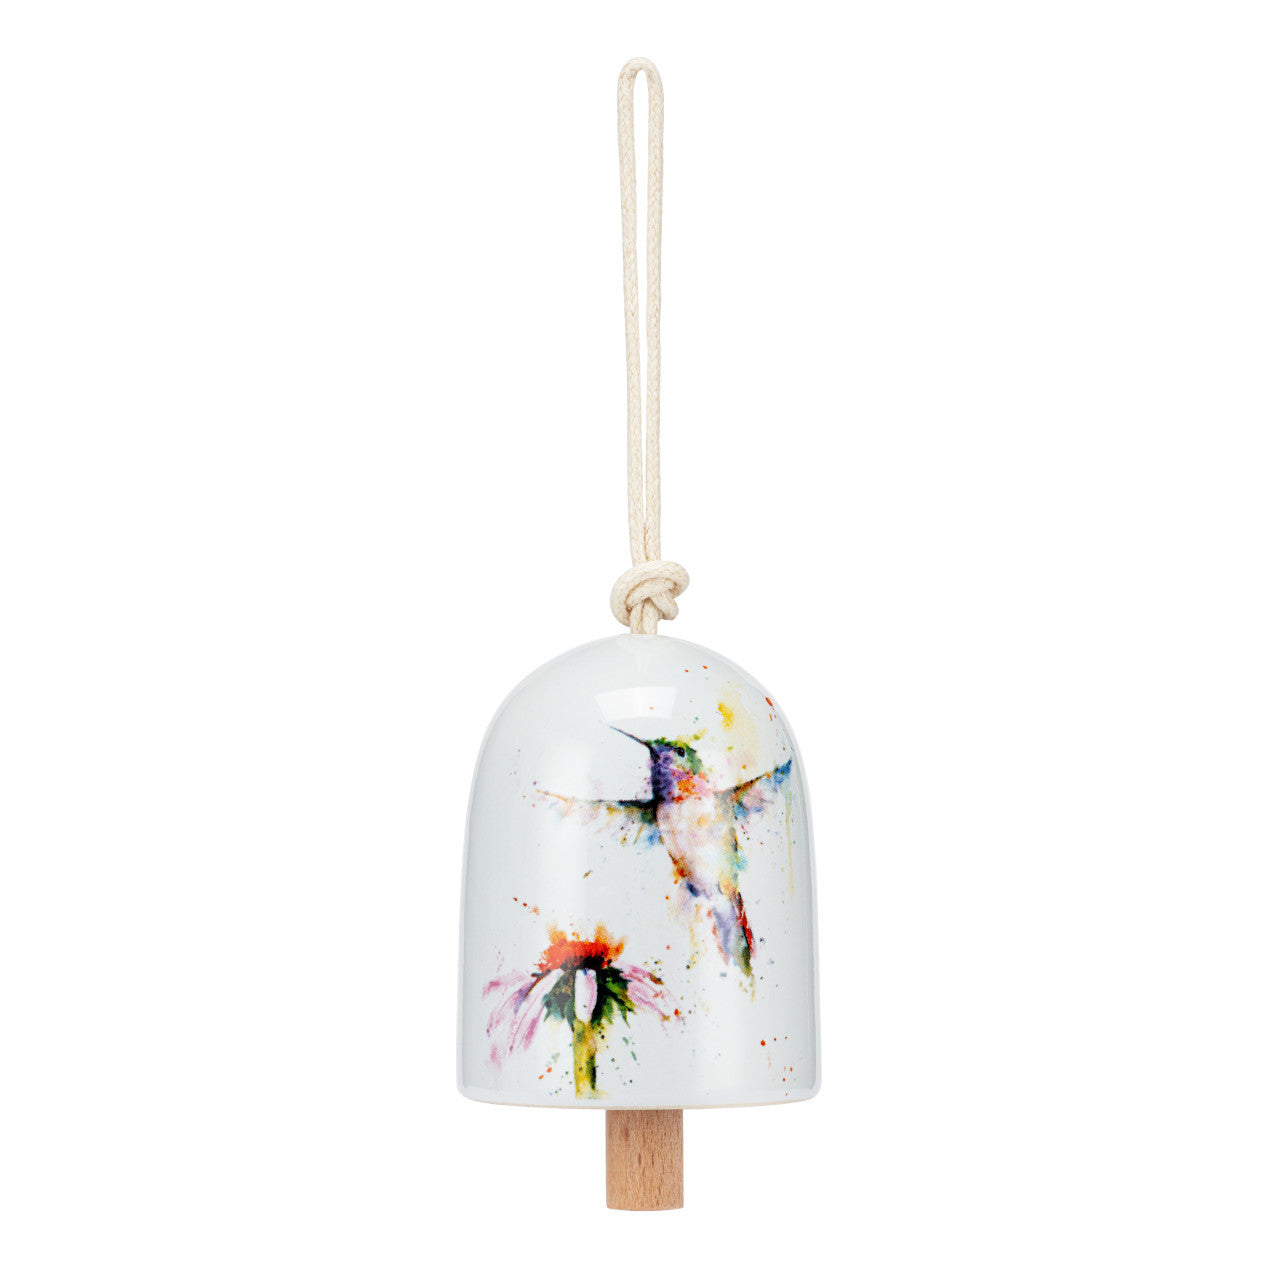 Demdaco PeeWee Hummingbird Mini Bell available at The Good Life Boutique